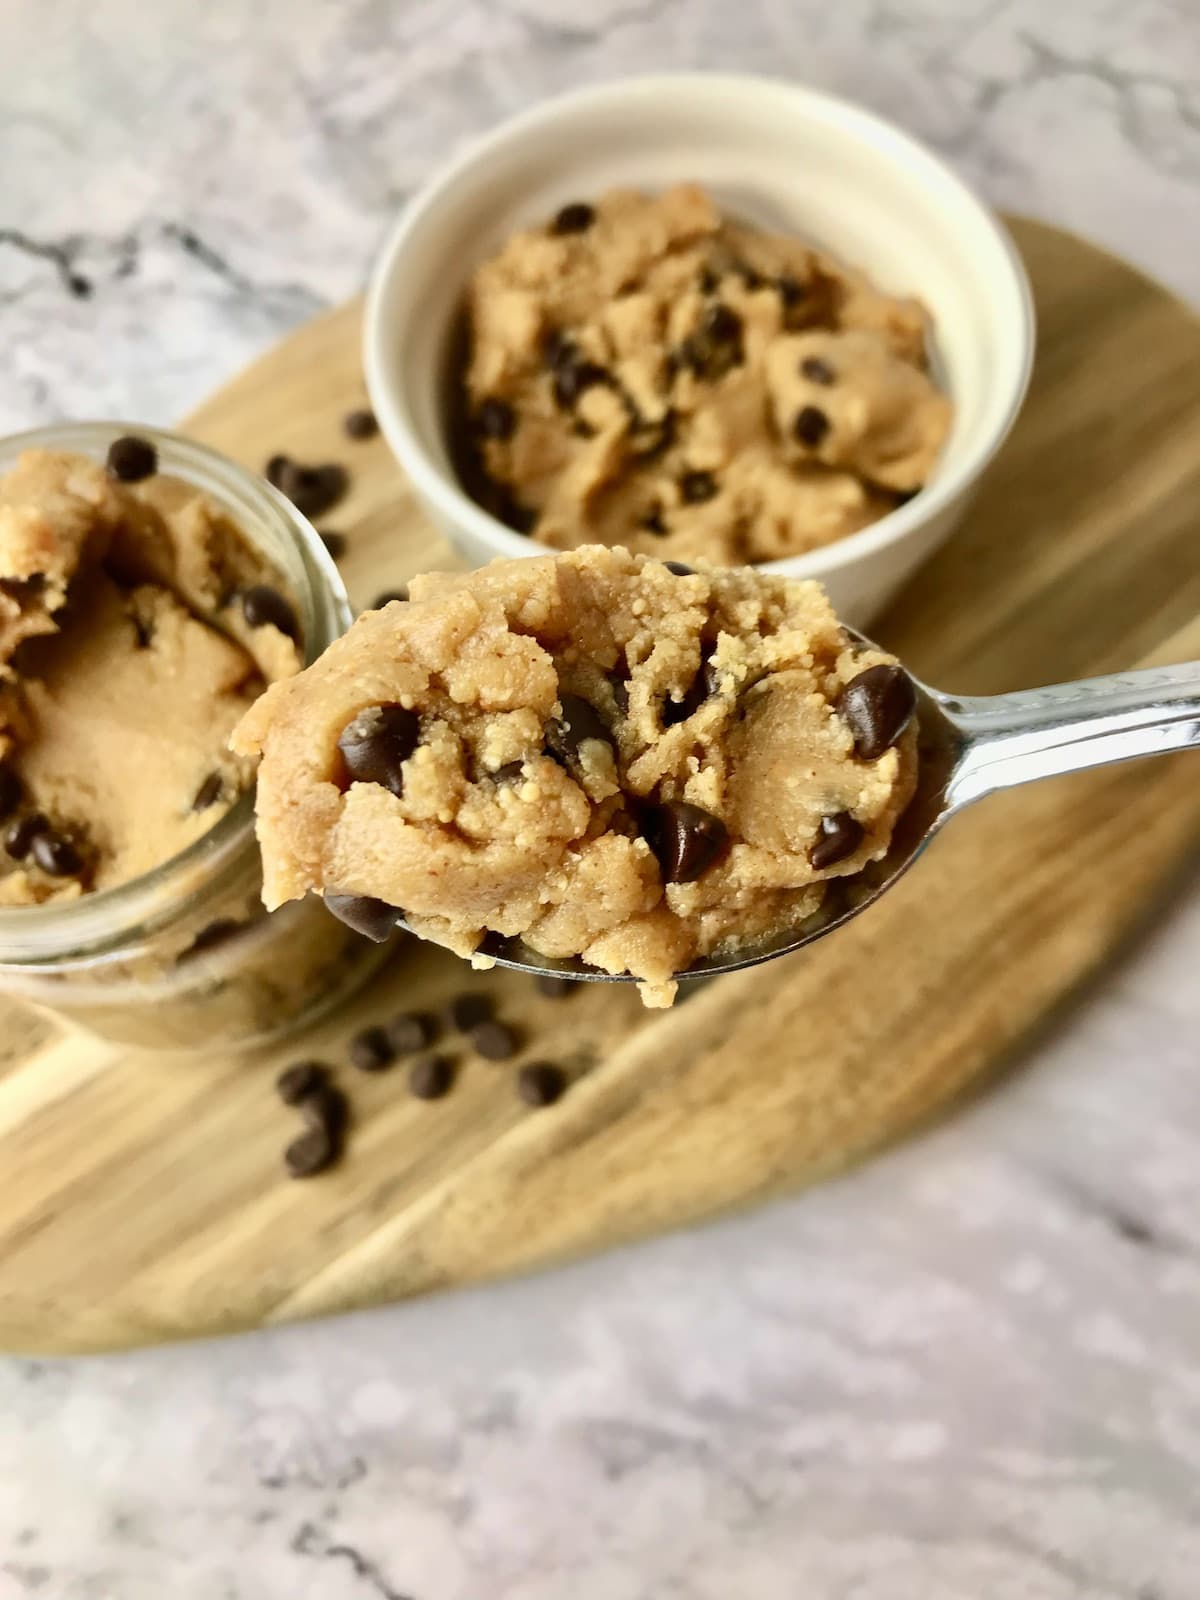 A spoonful of peanut butter chocolate chip cookie dough.